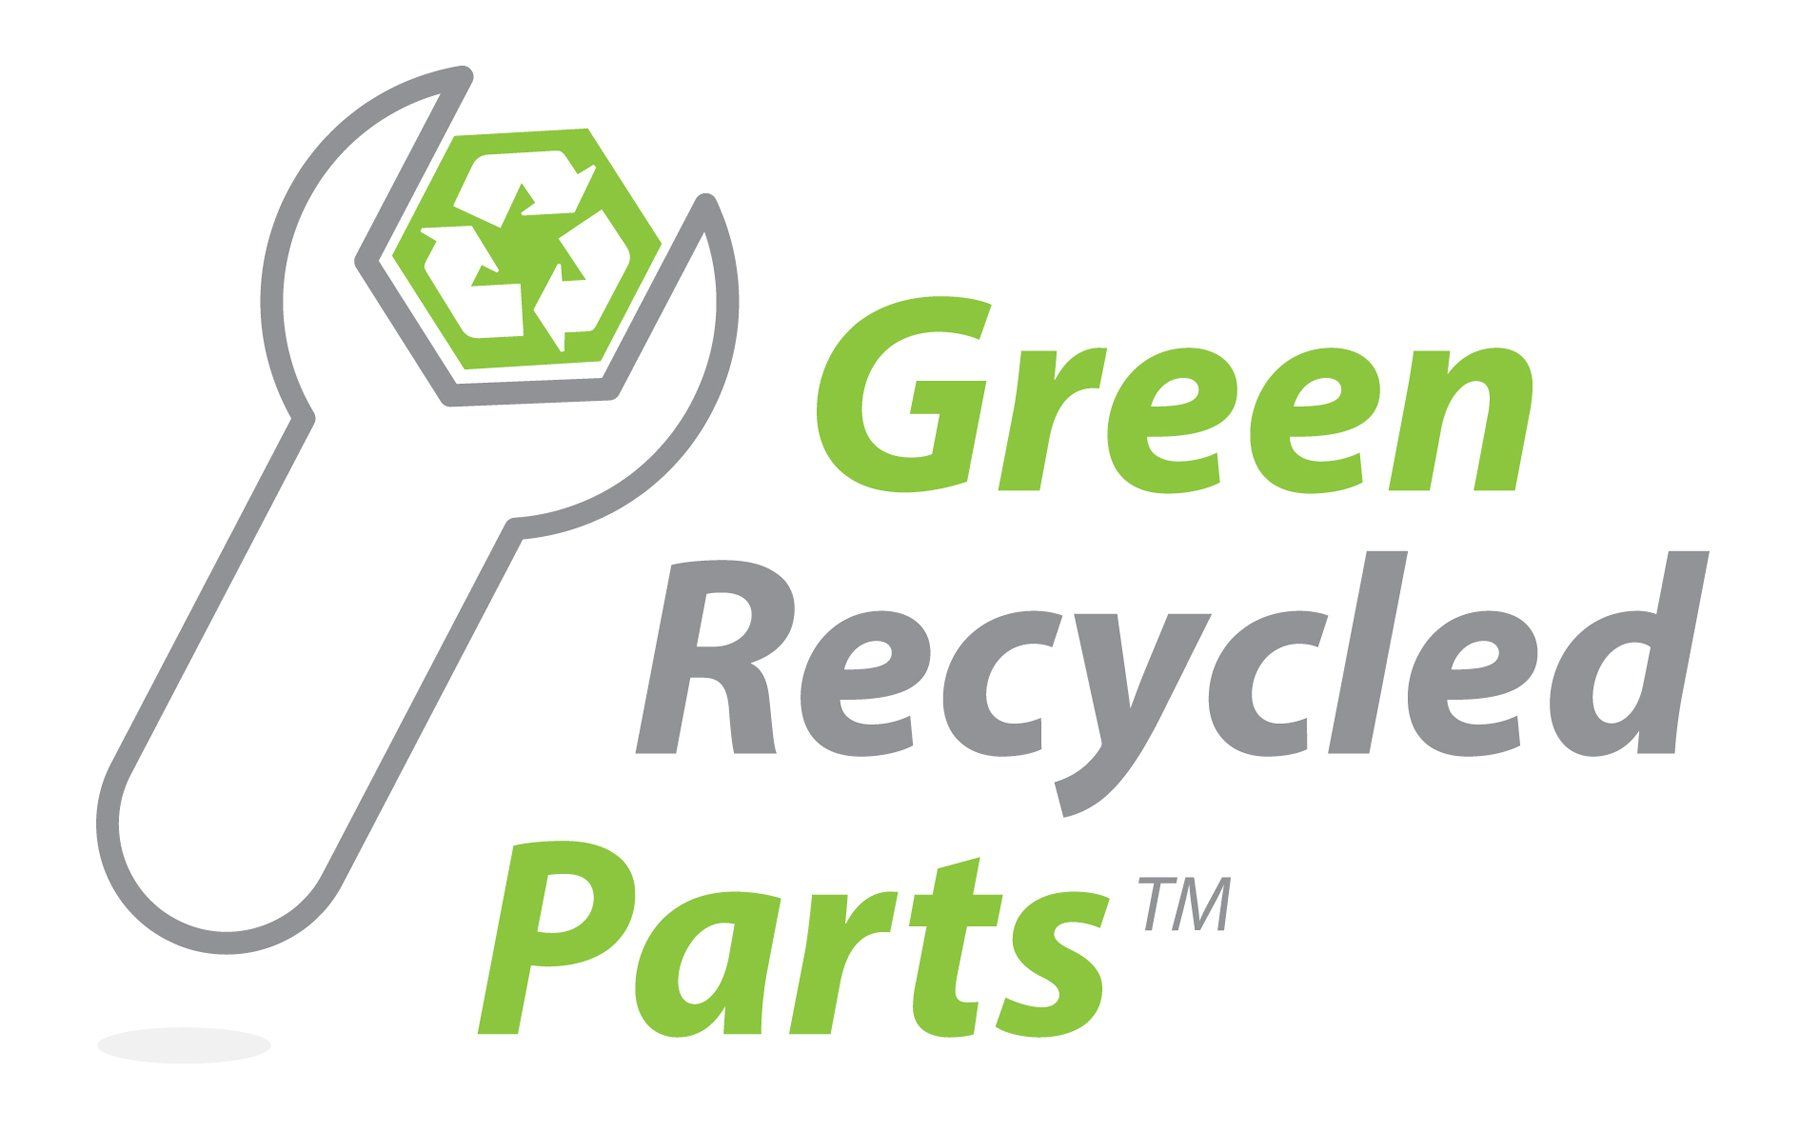 Green Recycled Parts logo